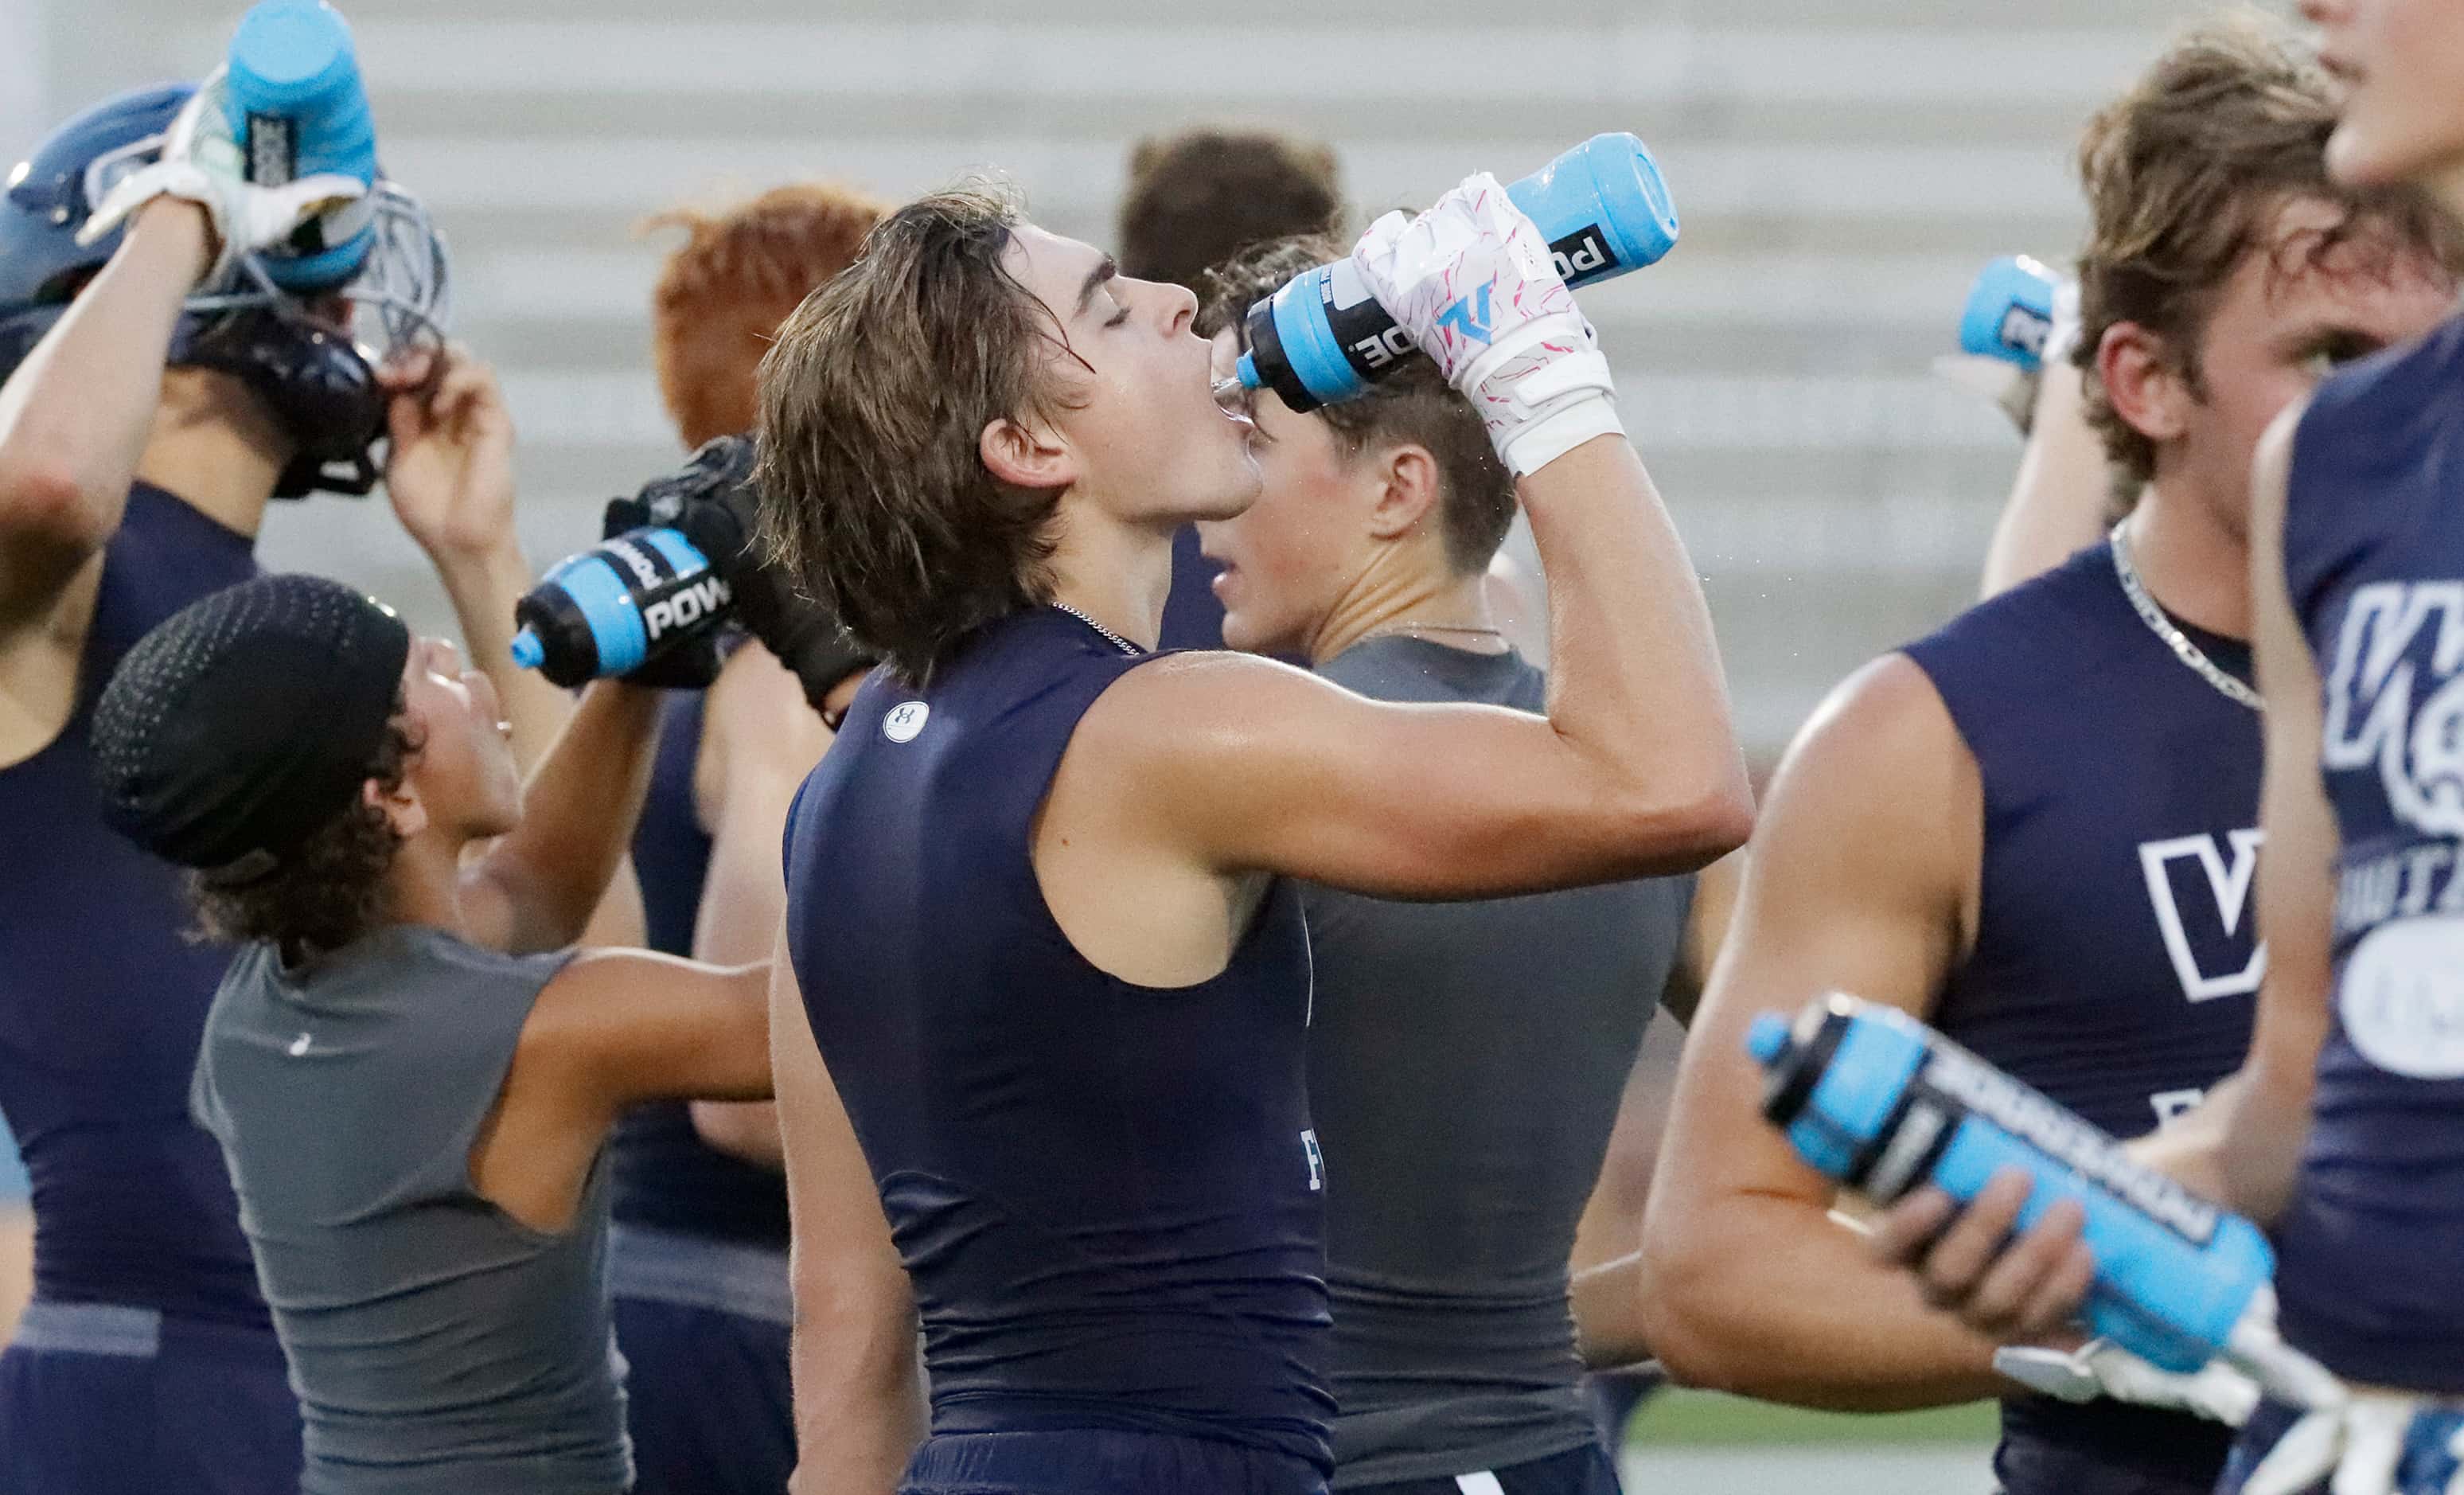 The team took frequent watert breaks throughout the practice as Walnut Grove High School...